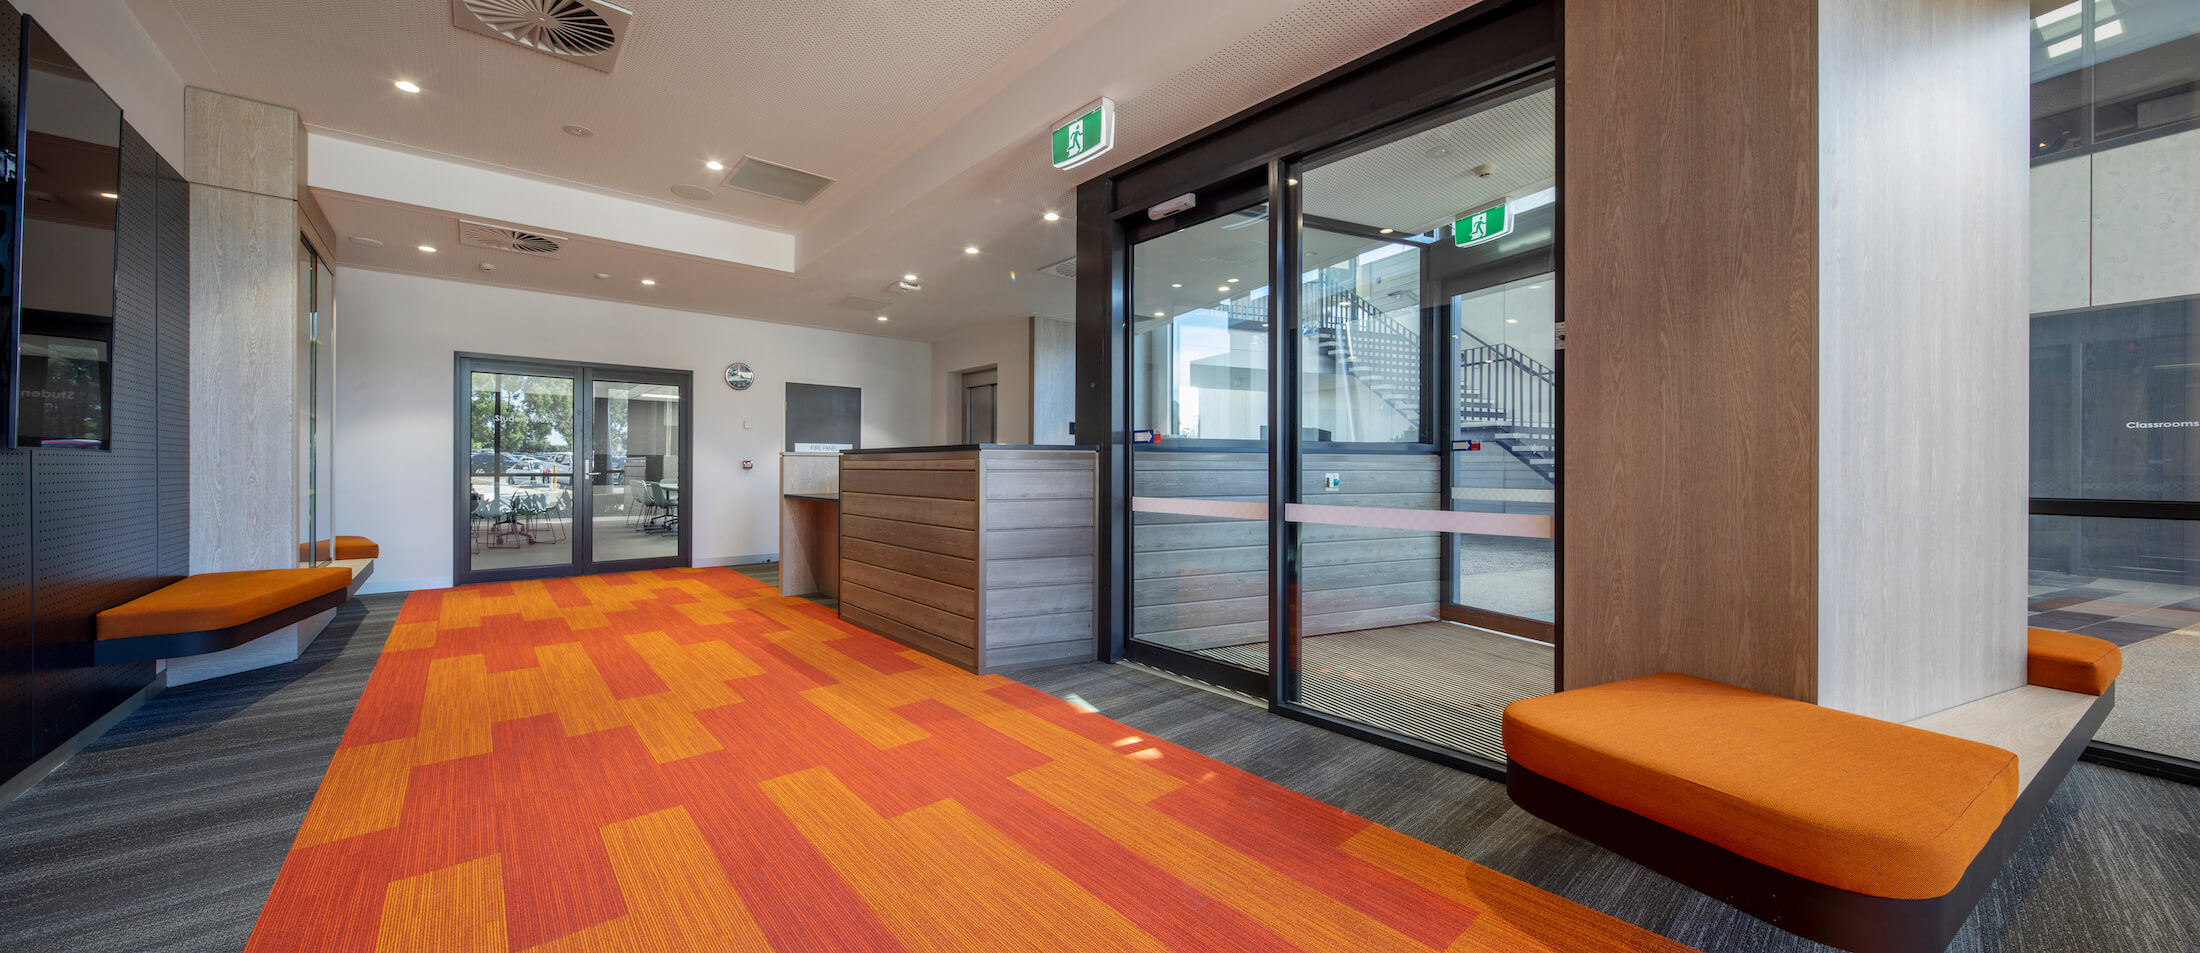 Foyer to Victoria Police Academy with orange feature wayfinding carpet detail and orange bench seating